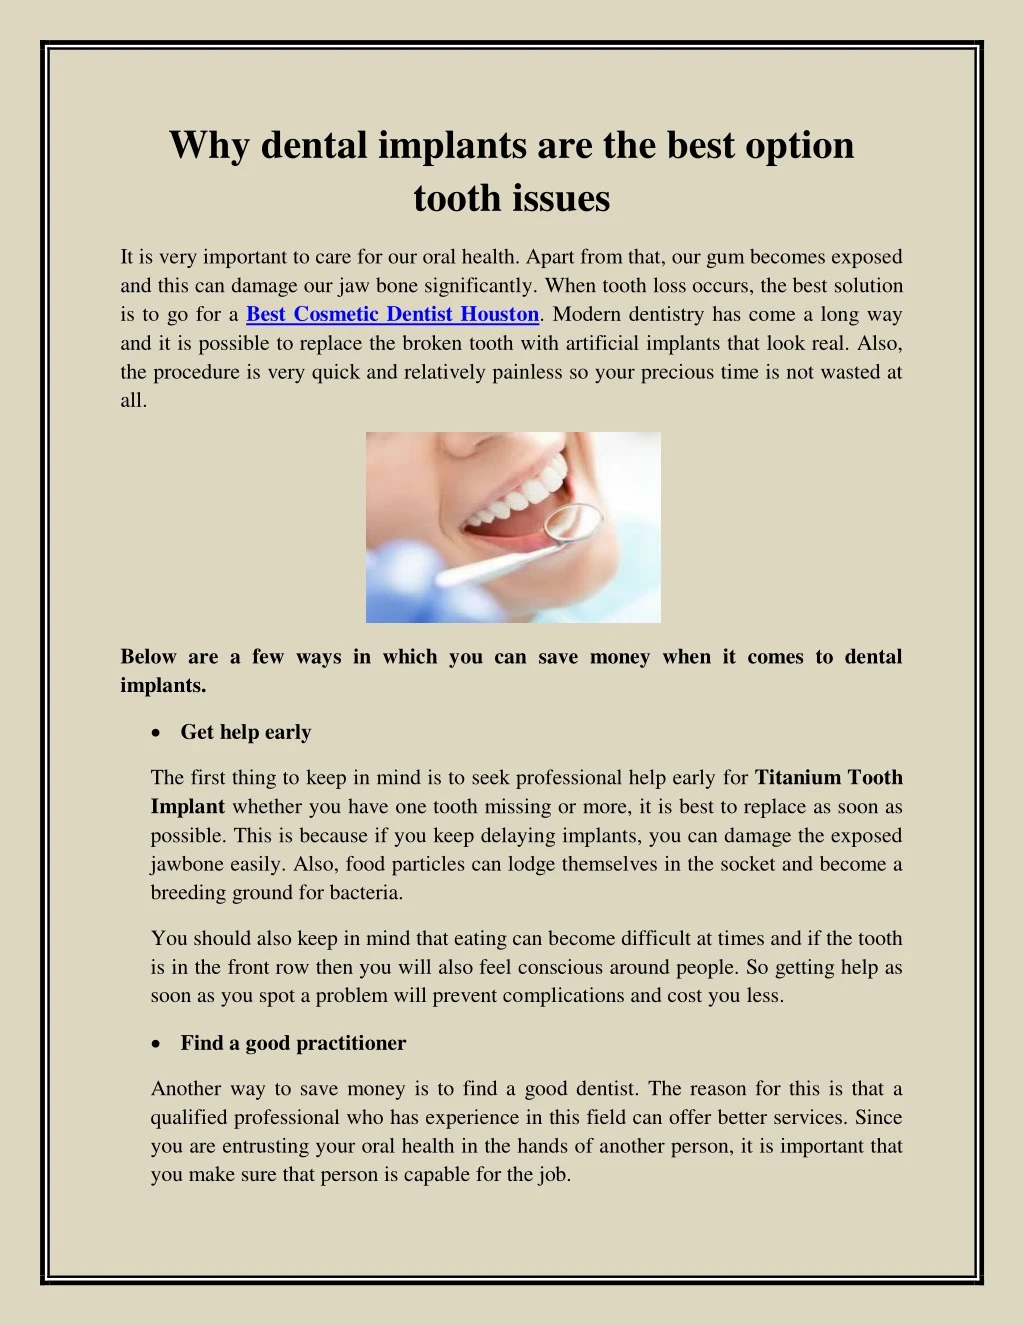 why dental implants are the best option tooth